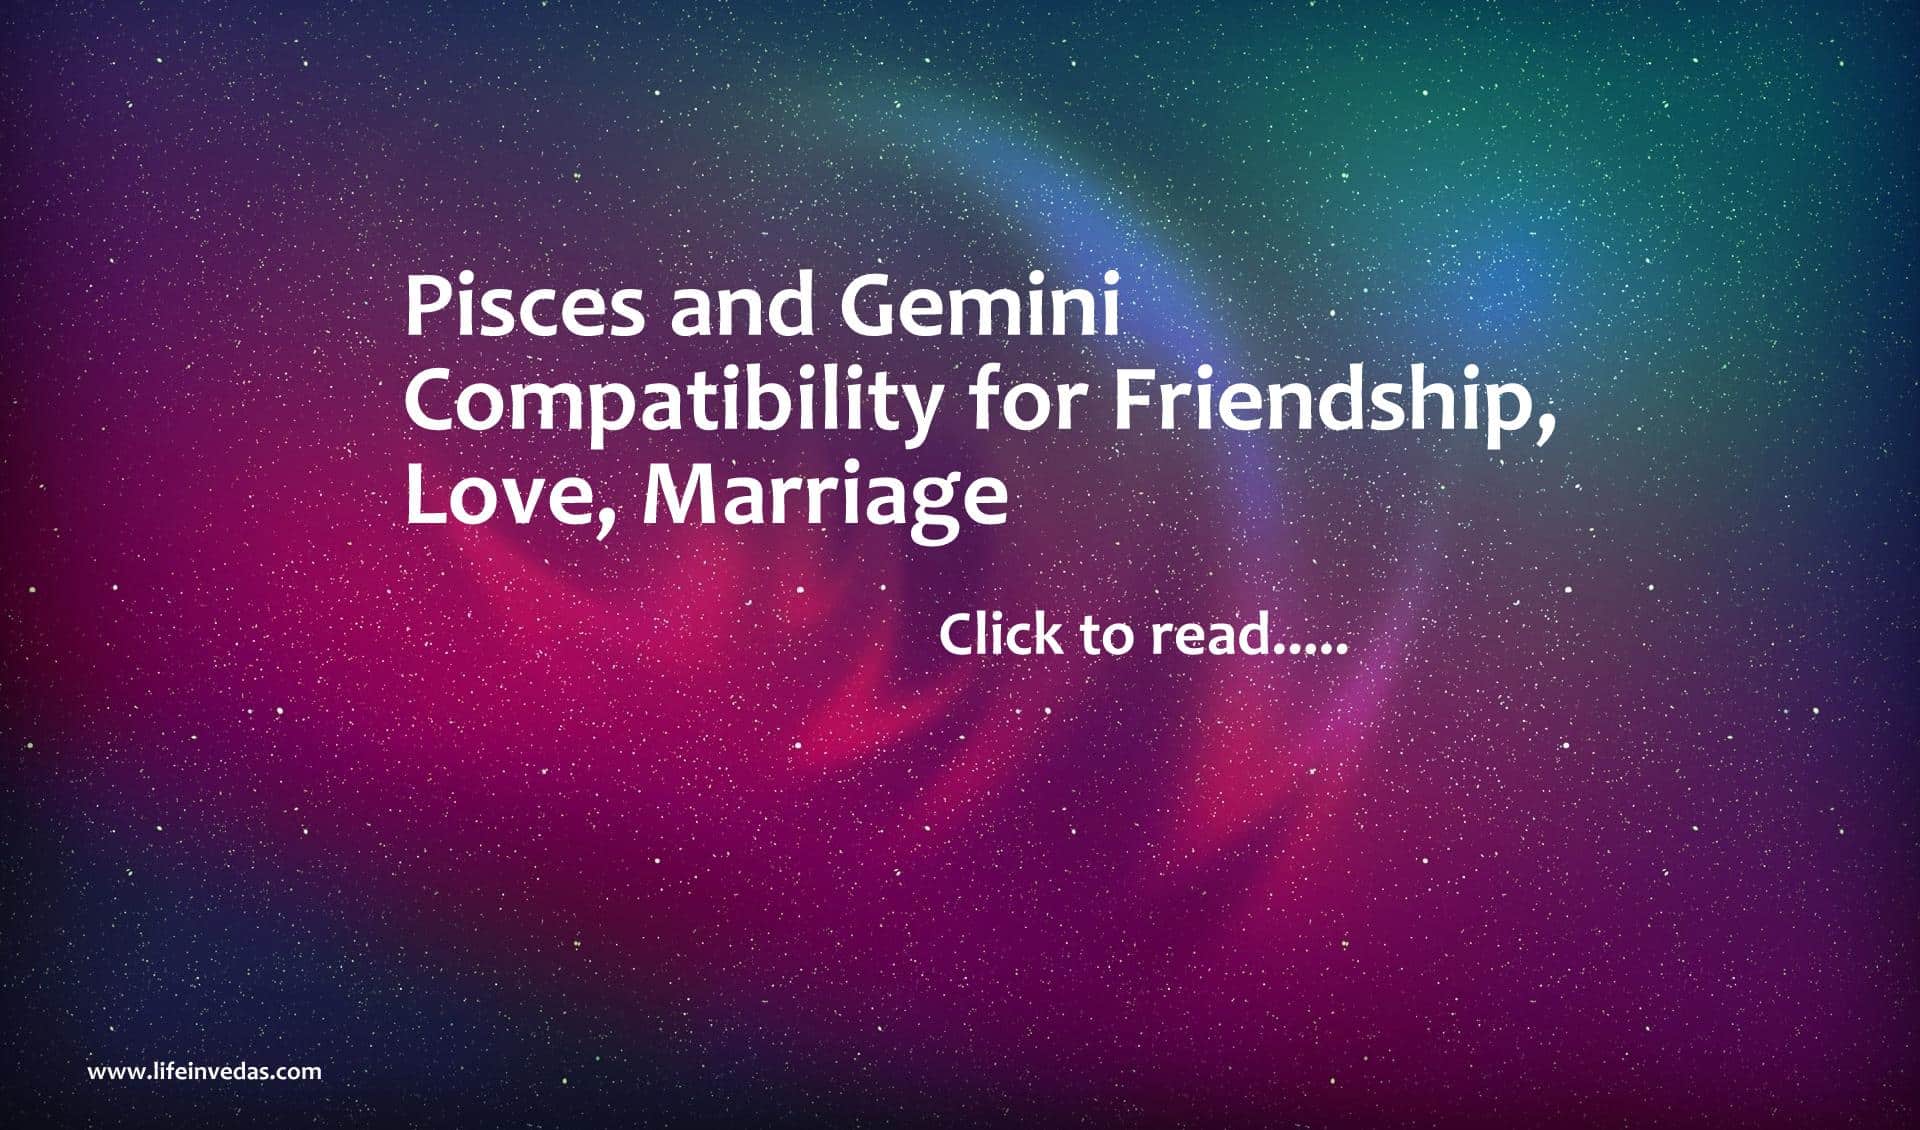 Are Pisces and Leos good friends?